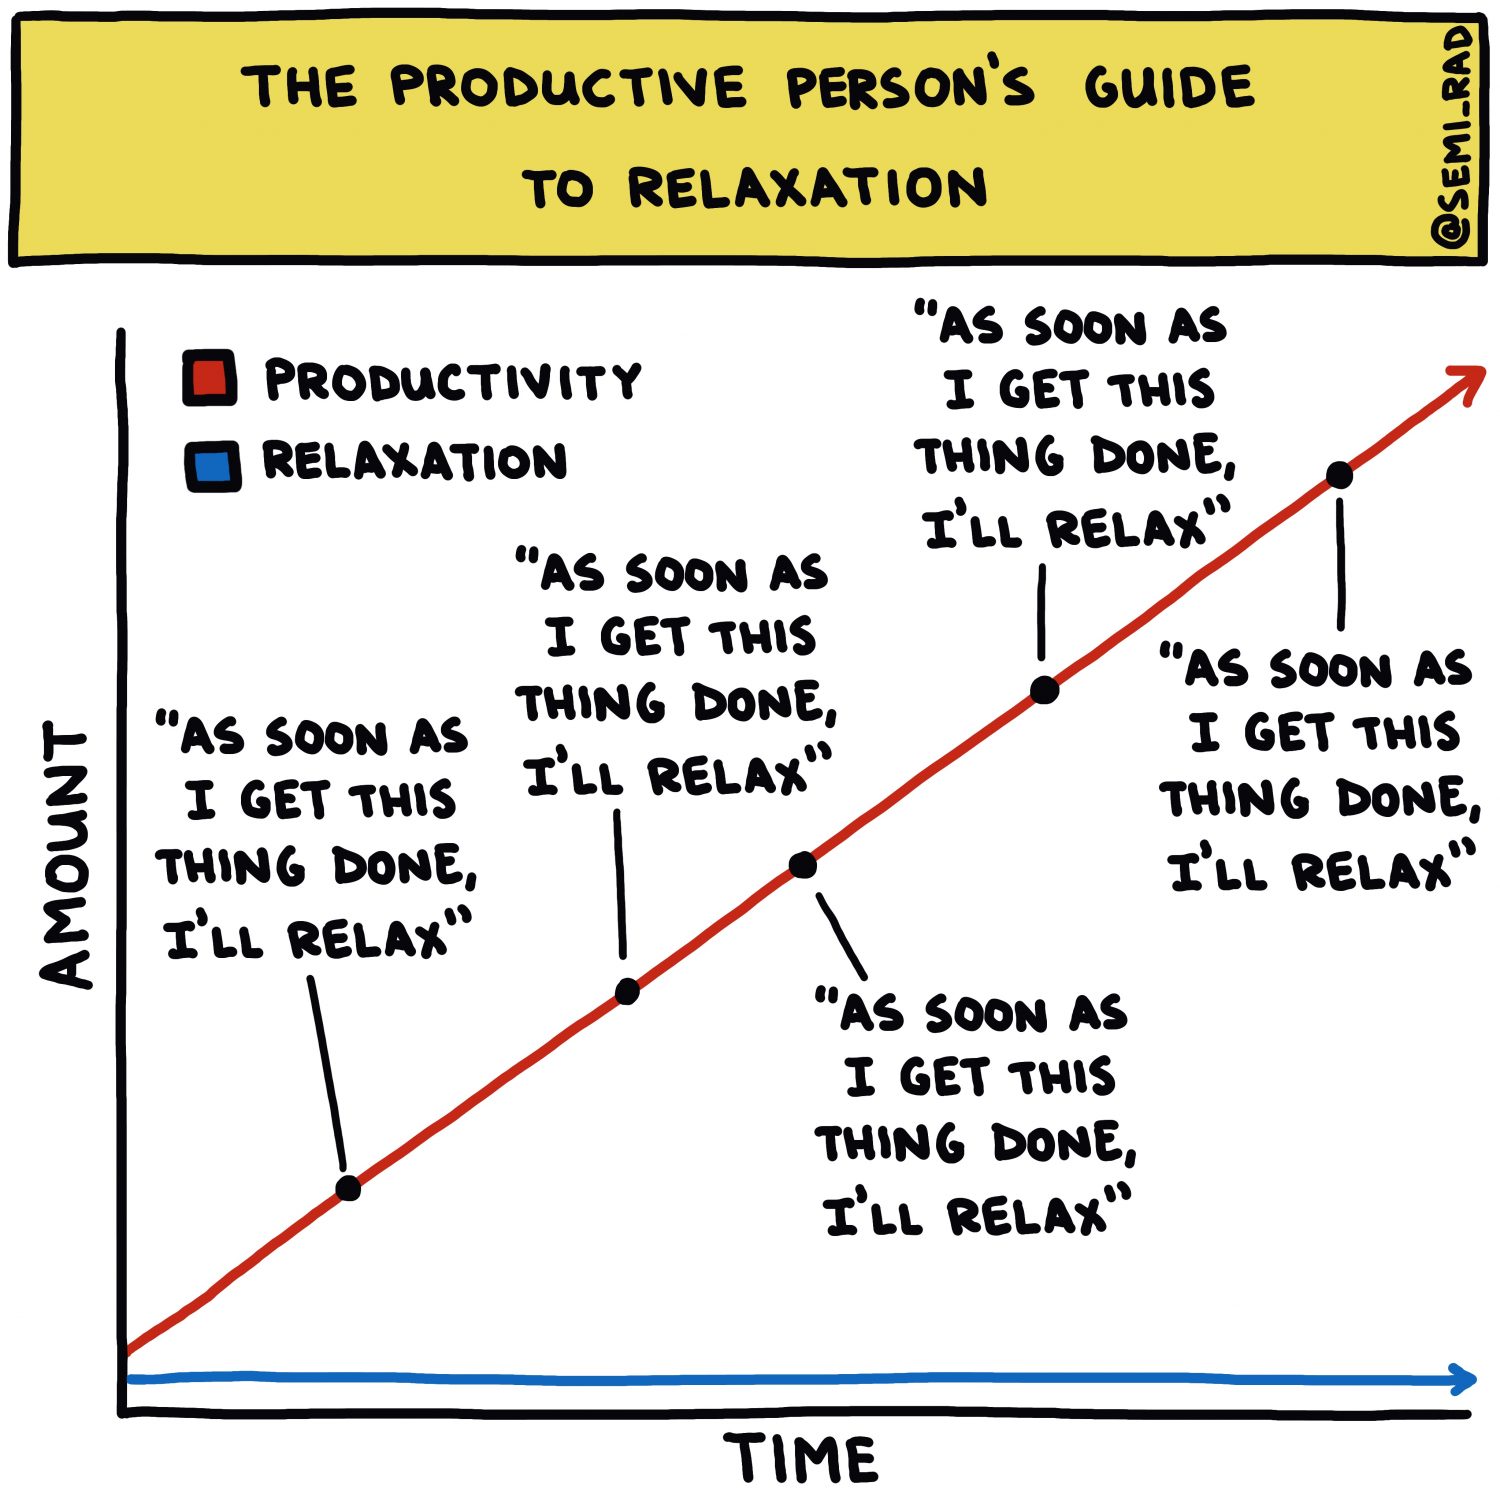 semi-rad chart: the productive person's guide to relaxation